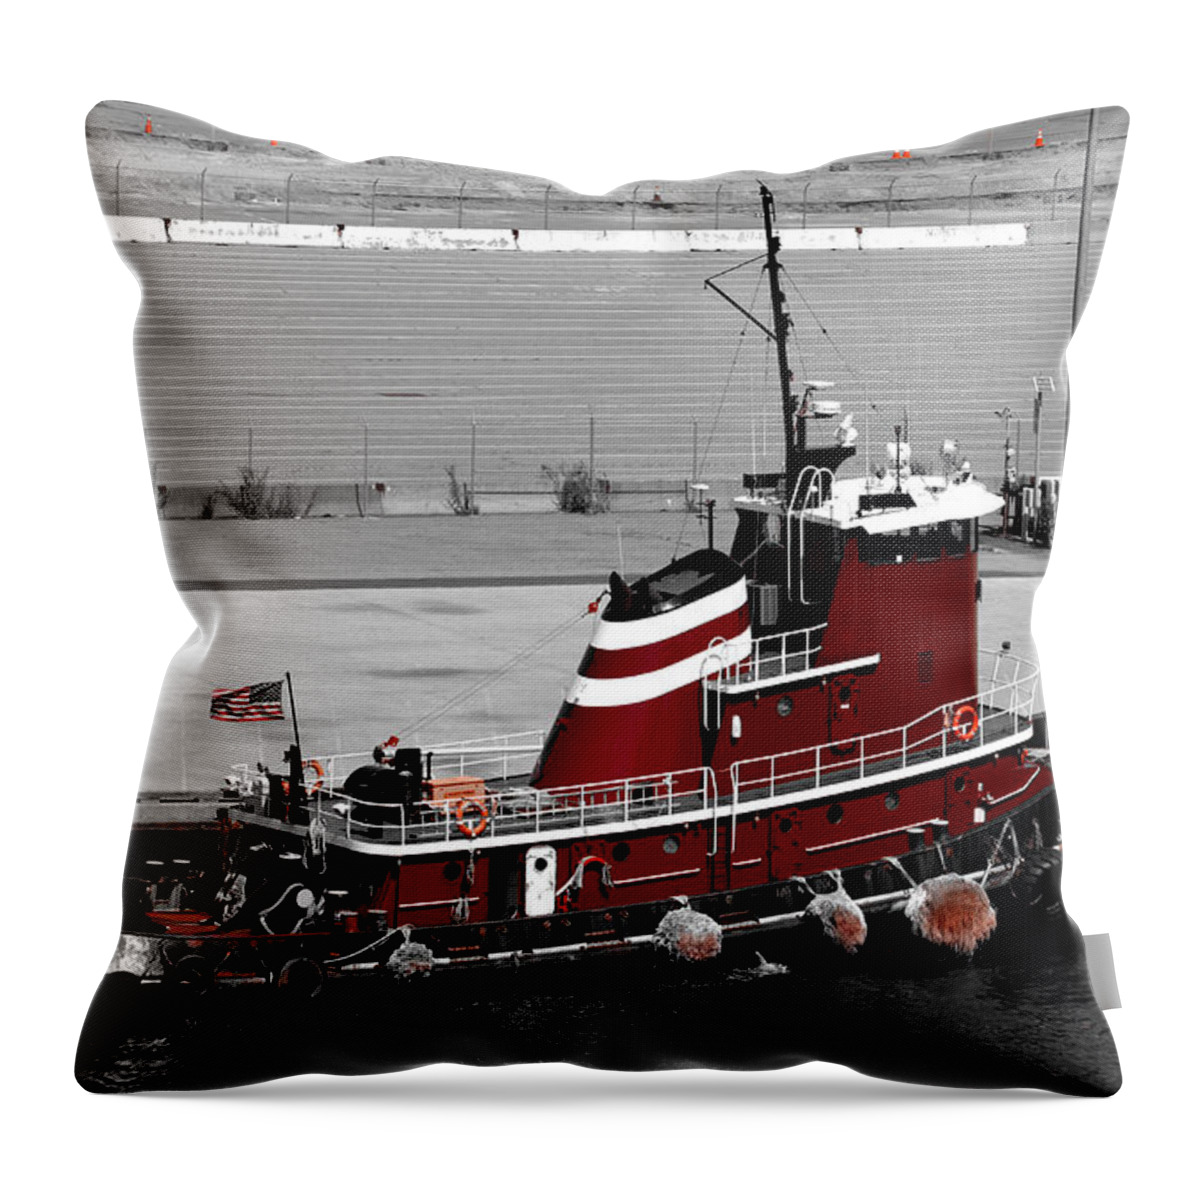 Digital Throw Pillow featuring the photograph Big Red by Richard Ortolano